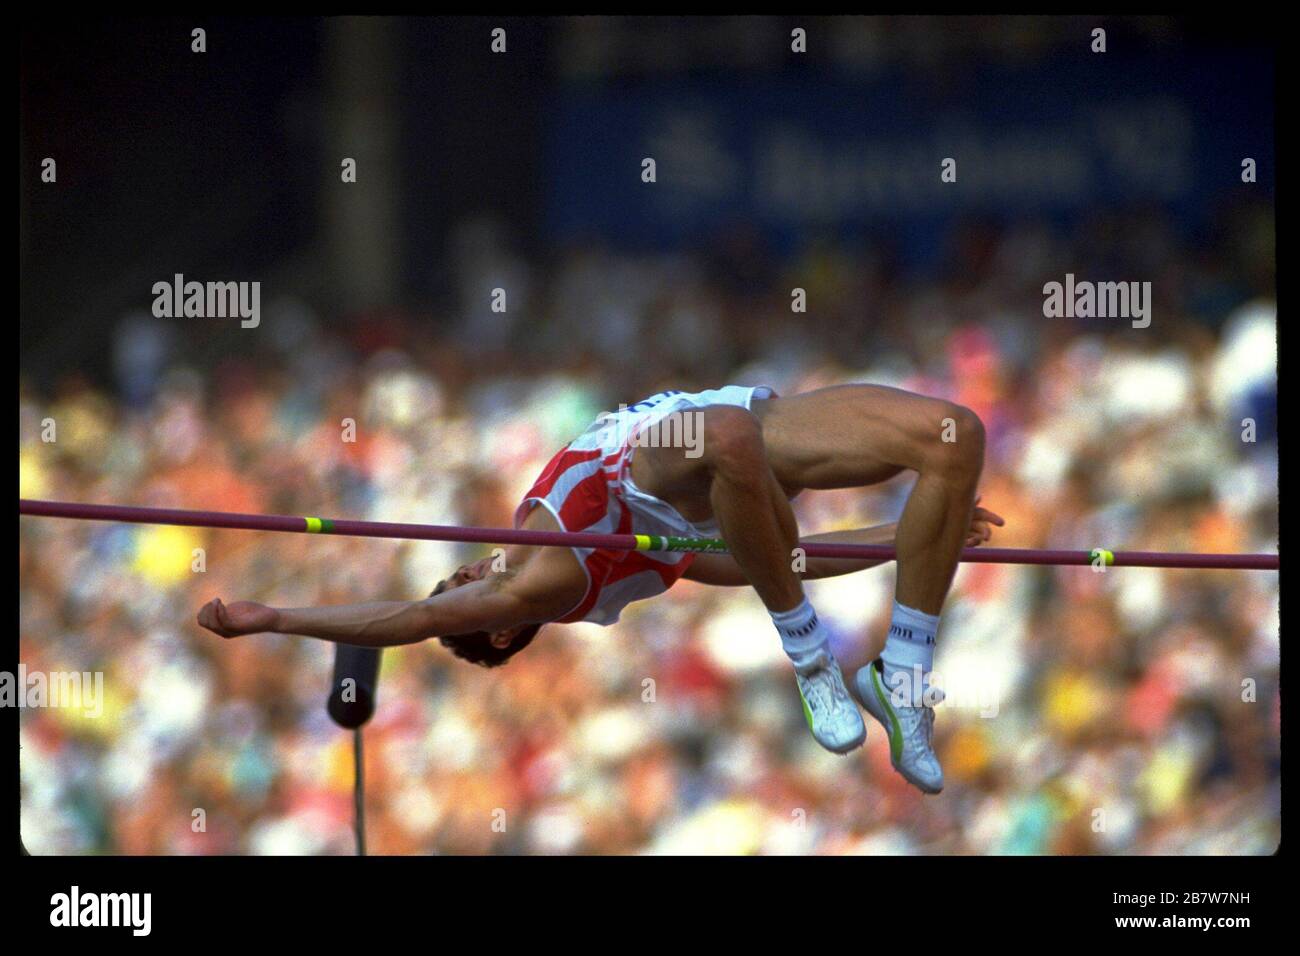 Barcelona Spain, 1992: Competitor strains to clear crossbar in men's high jump during track and field finals at Summer Olympics.  ©Bob Daemmrich Stock Photo